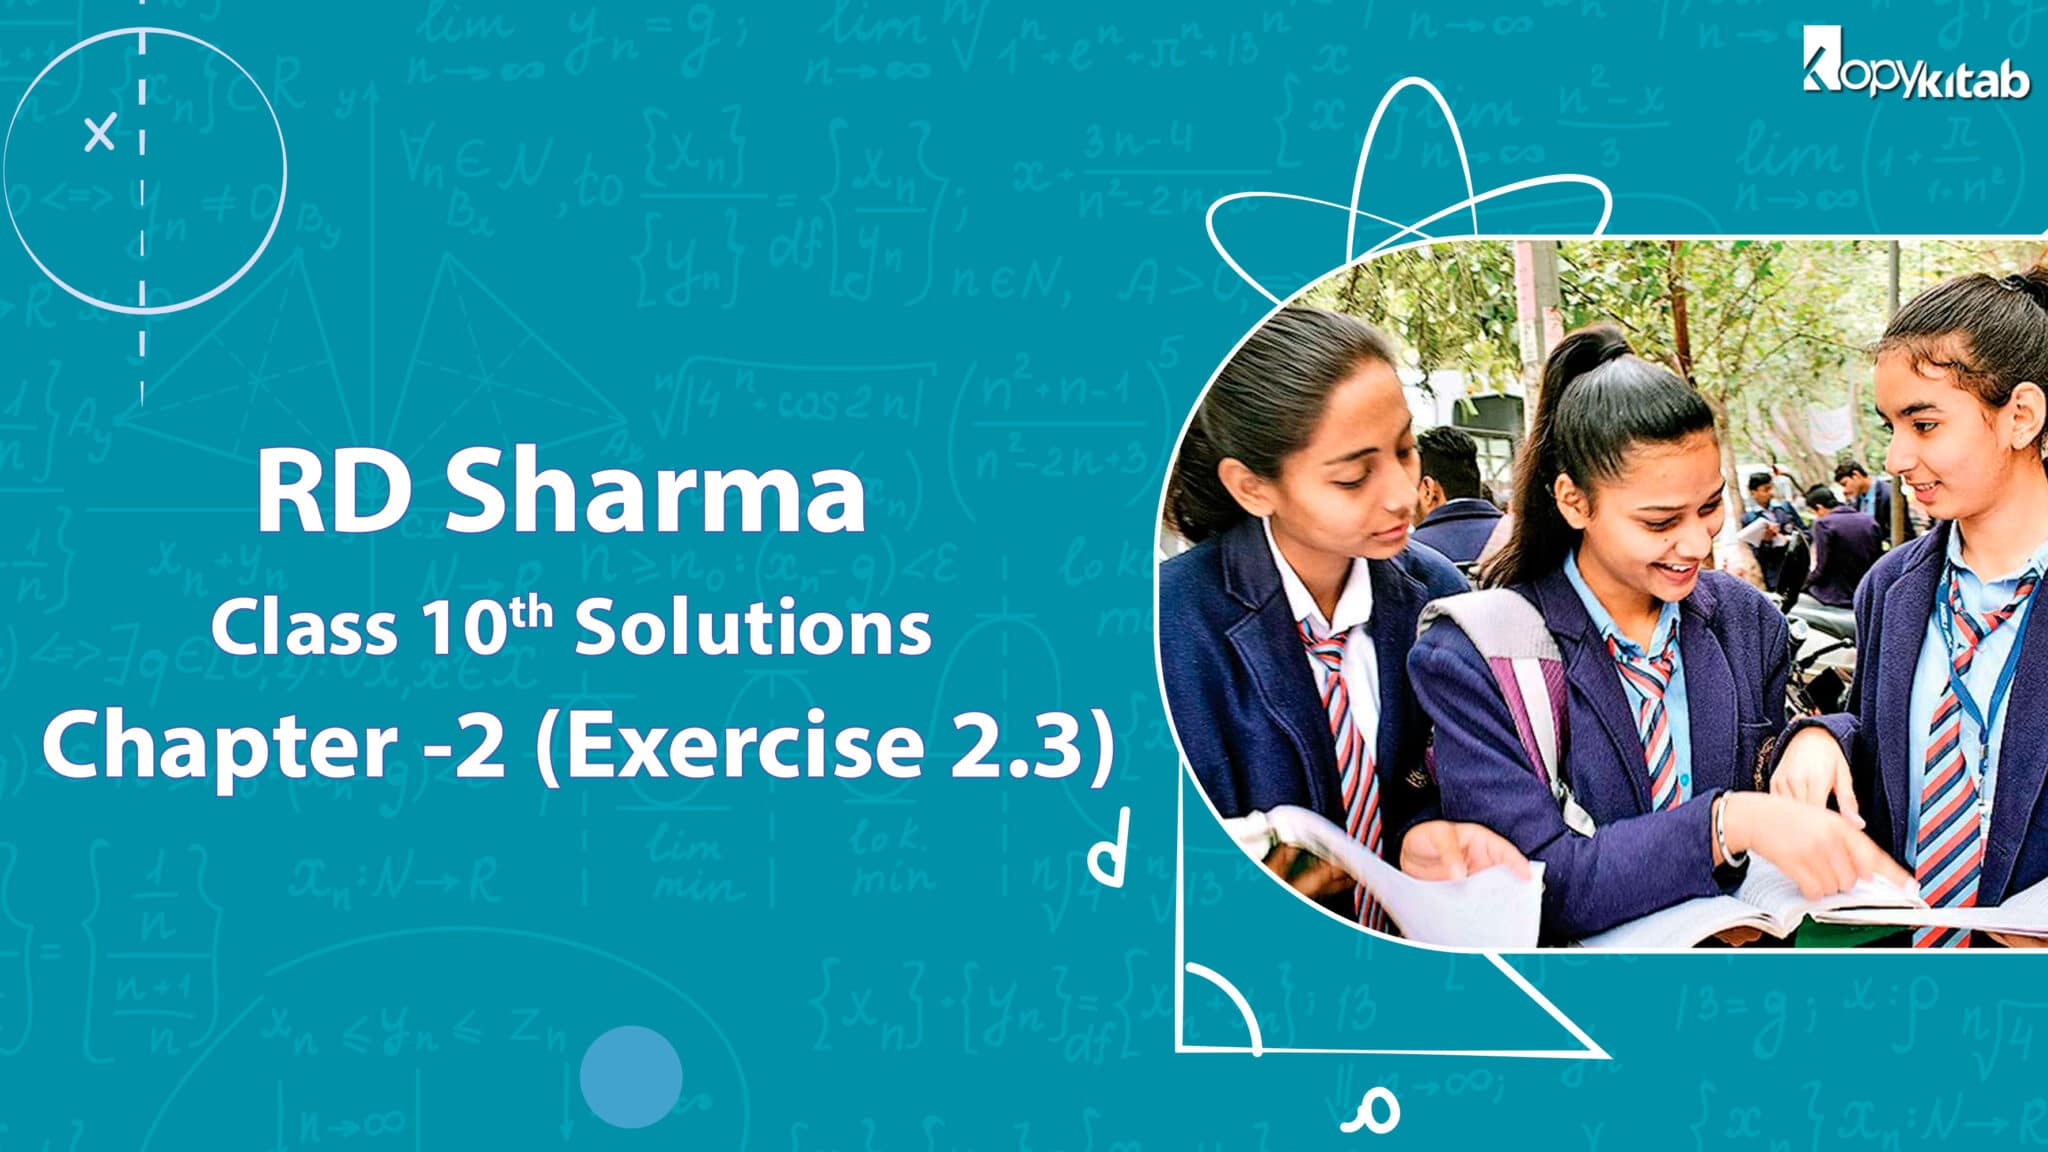 RD Sharma Class 10 Solutions Chapter 2 Exercise 2.3